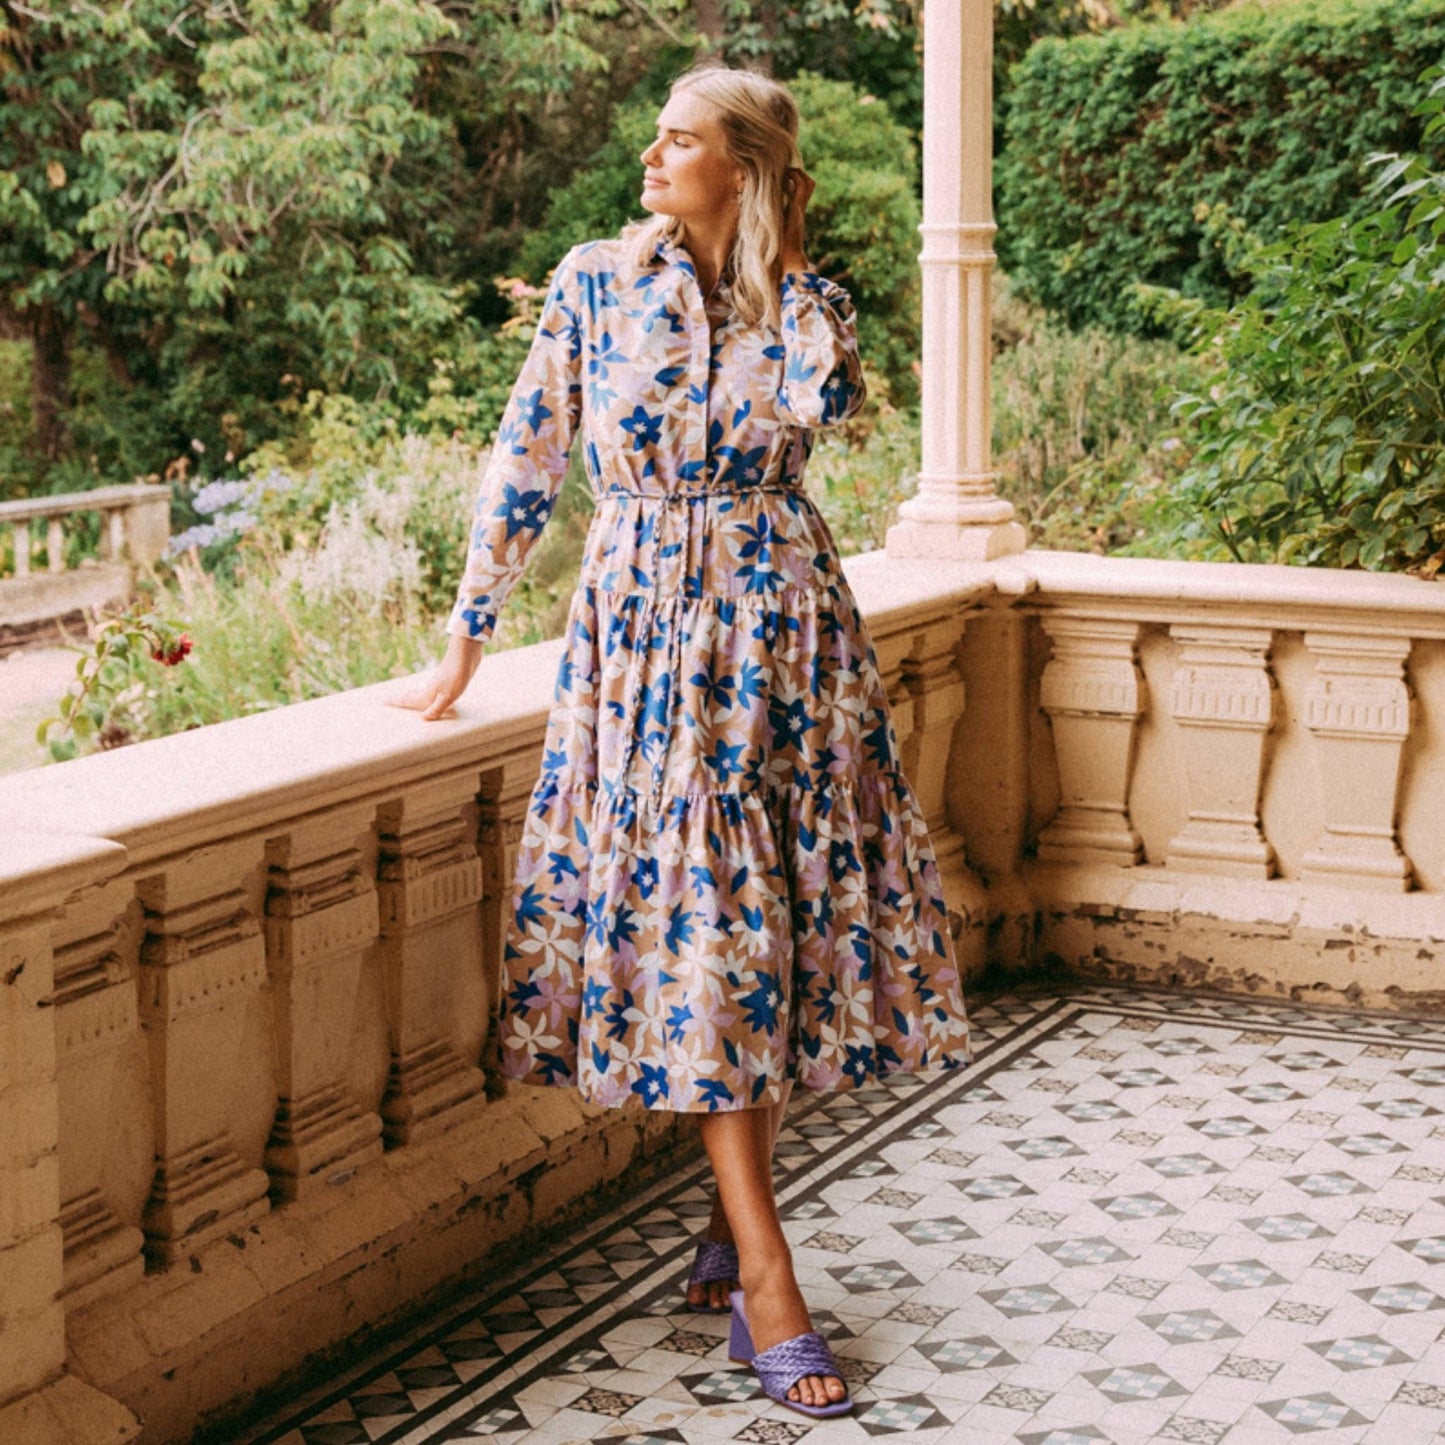 This pretty shirt style floral print dress features a button front and cuff and a cute collar. With a gently tiered skirt, hidden pockets, a self tie belt the Marguerite dress from Elm features blue and white abstract flowers on a coffee coloured base